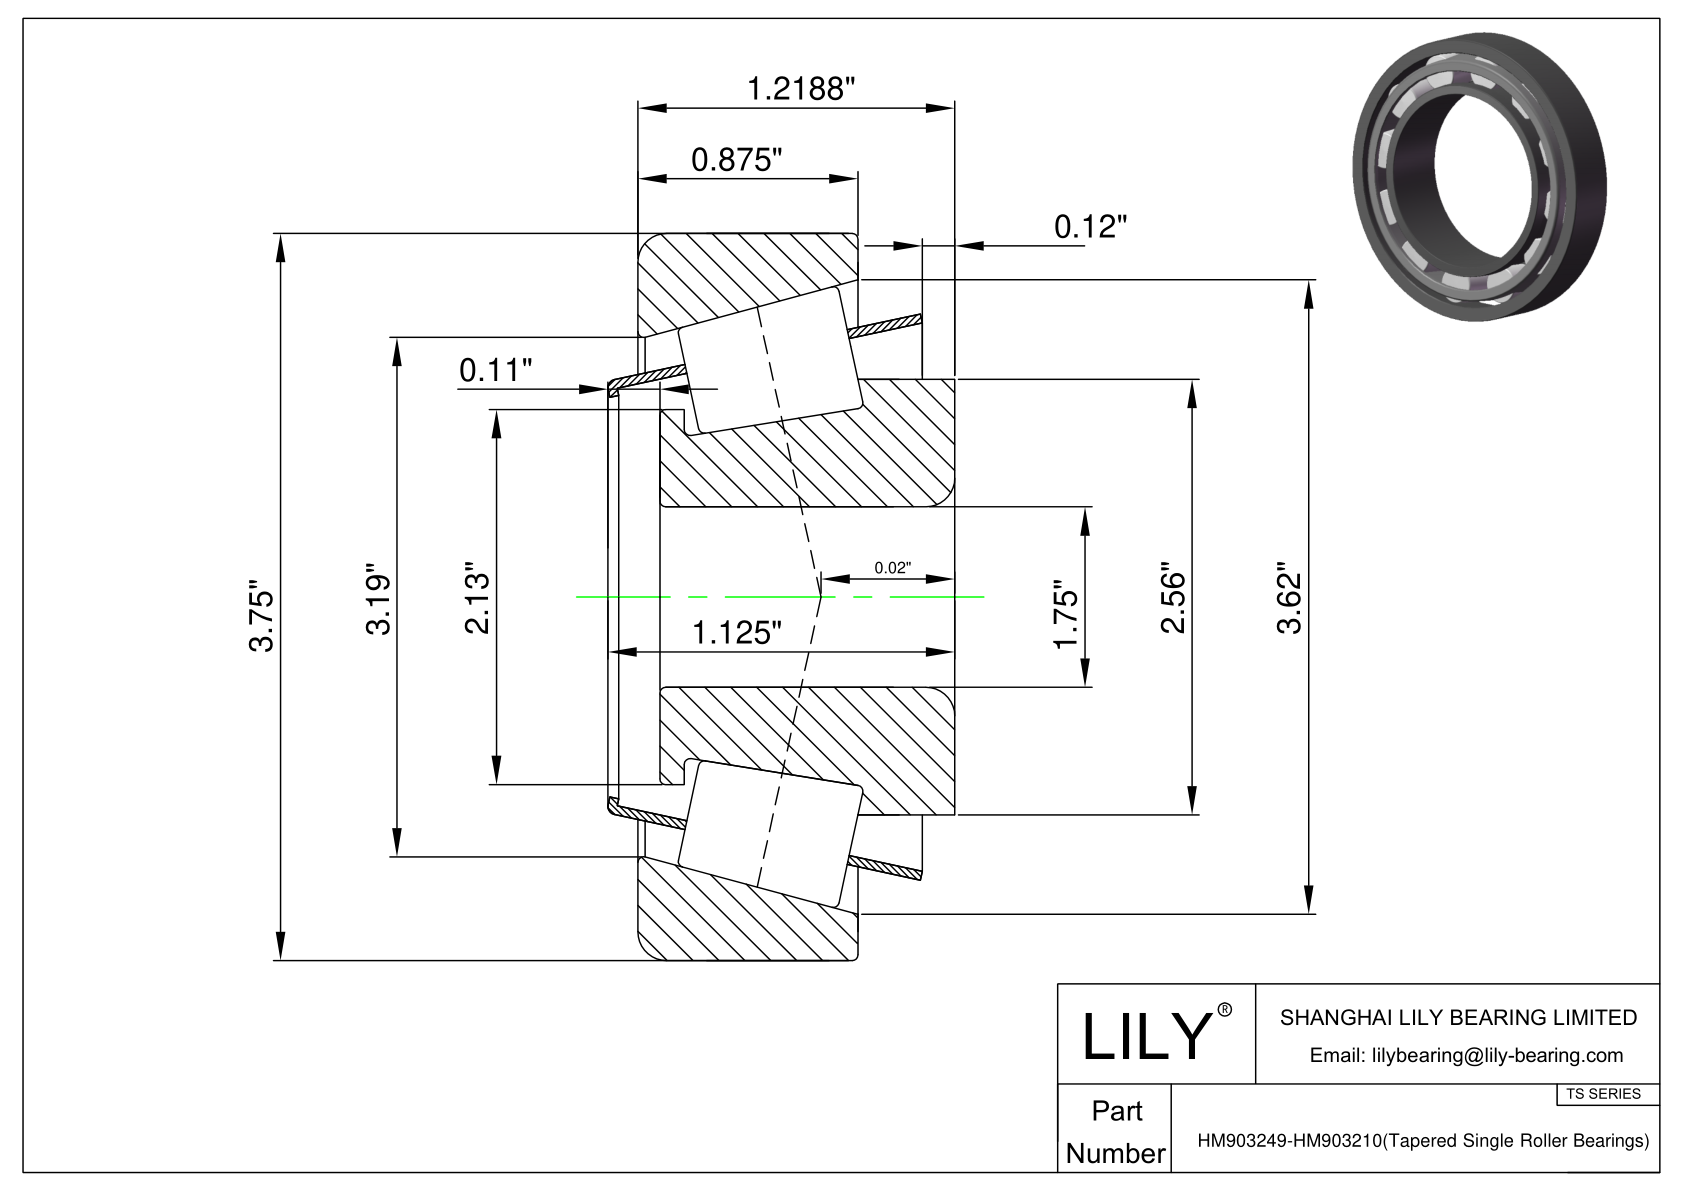 HM903249-HM903210 TS (Tapered Single Roller Bearings) (Imperial) cad drawing